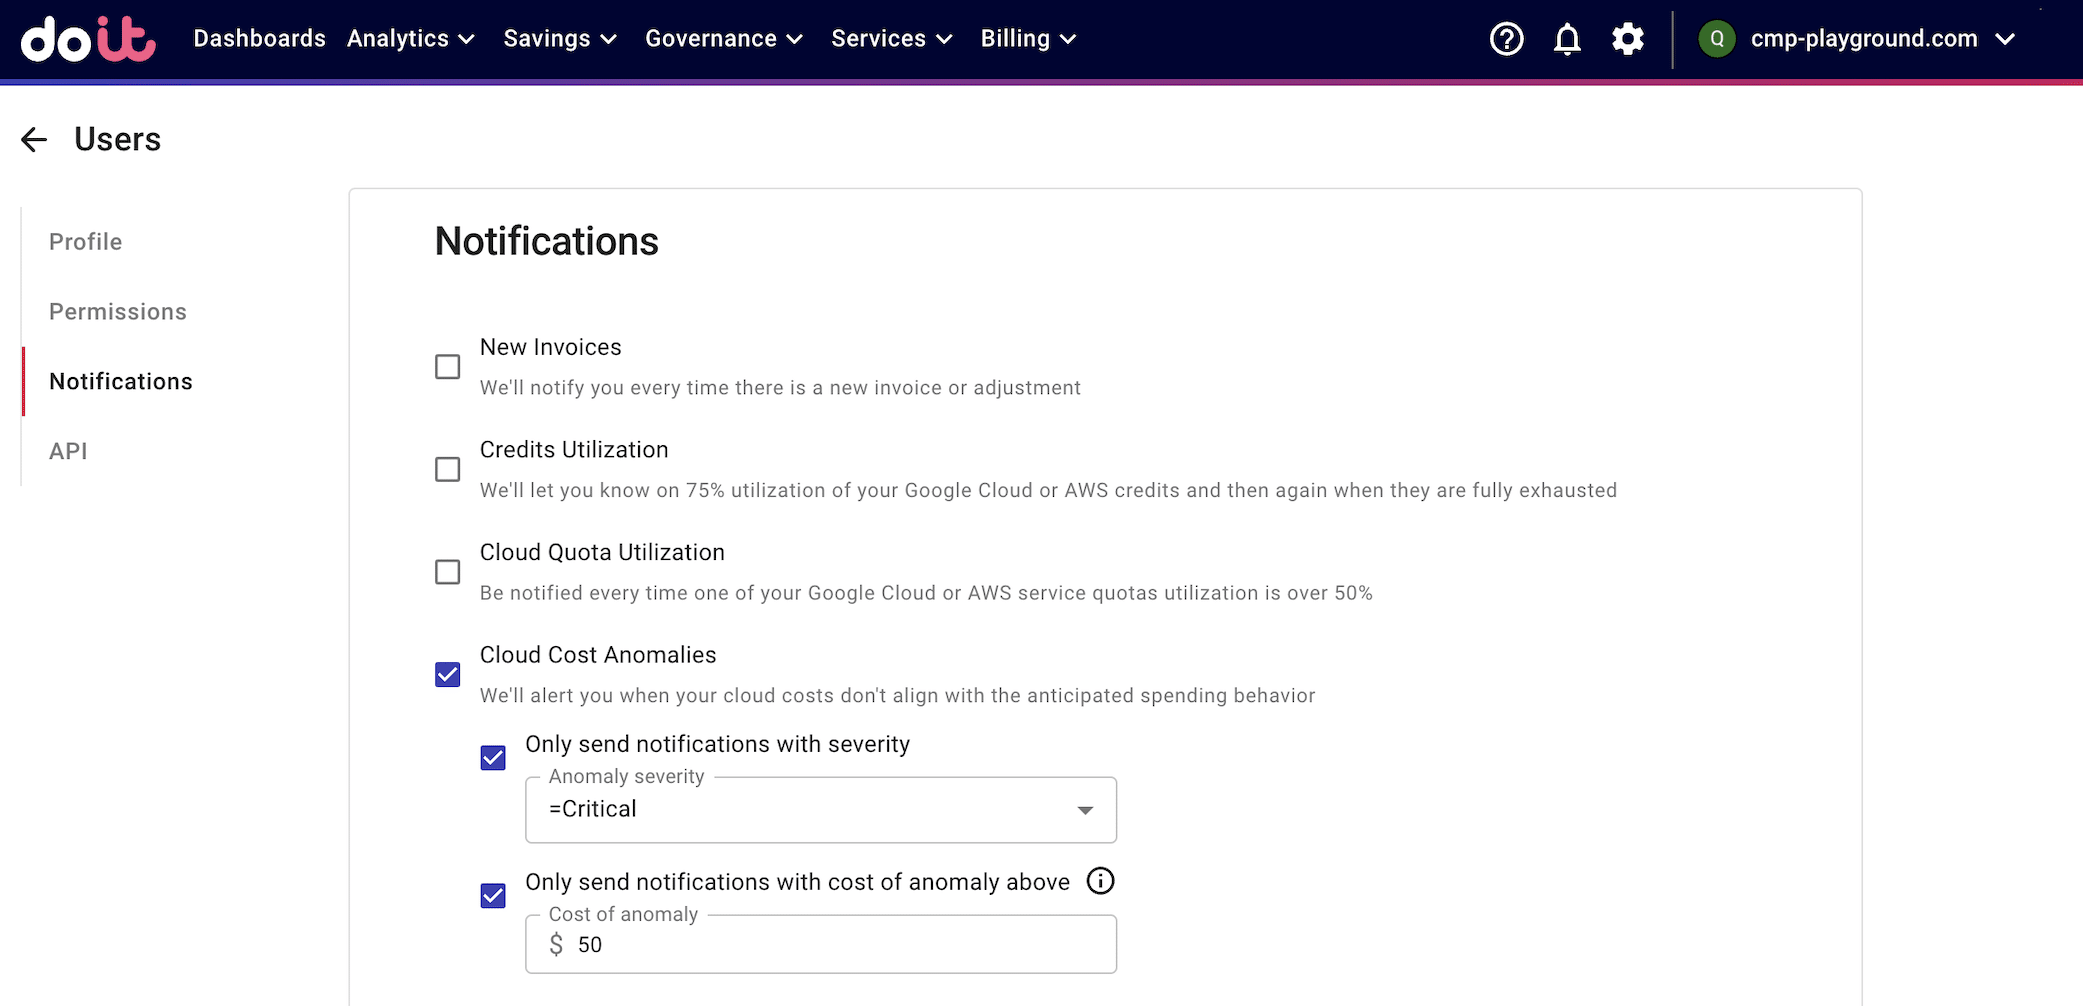 The Notifications screen with Cloud Cost Anomalies selected